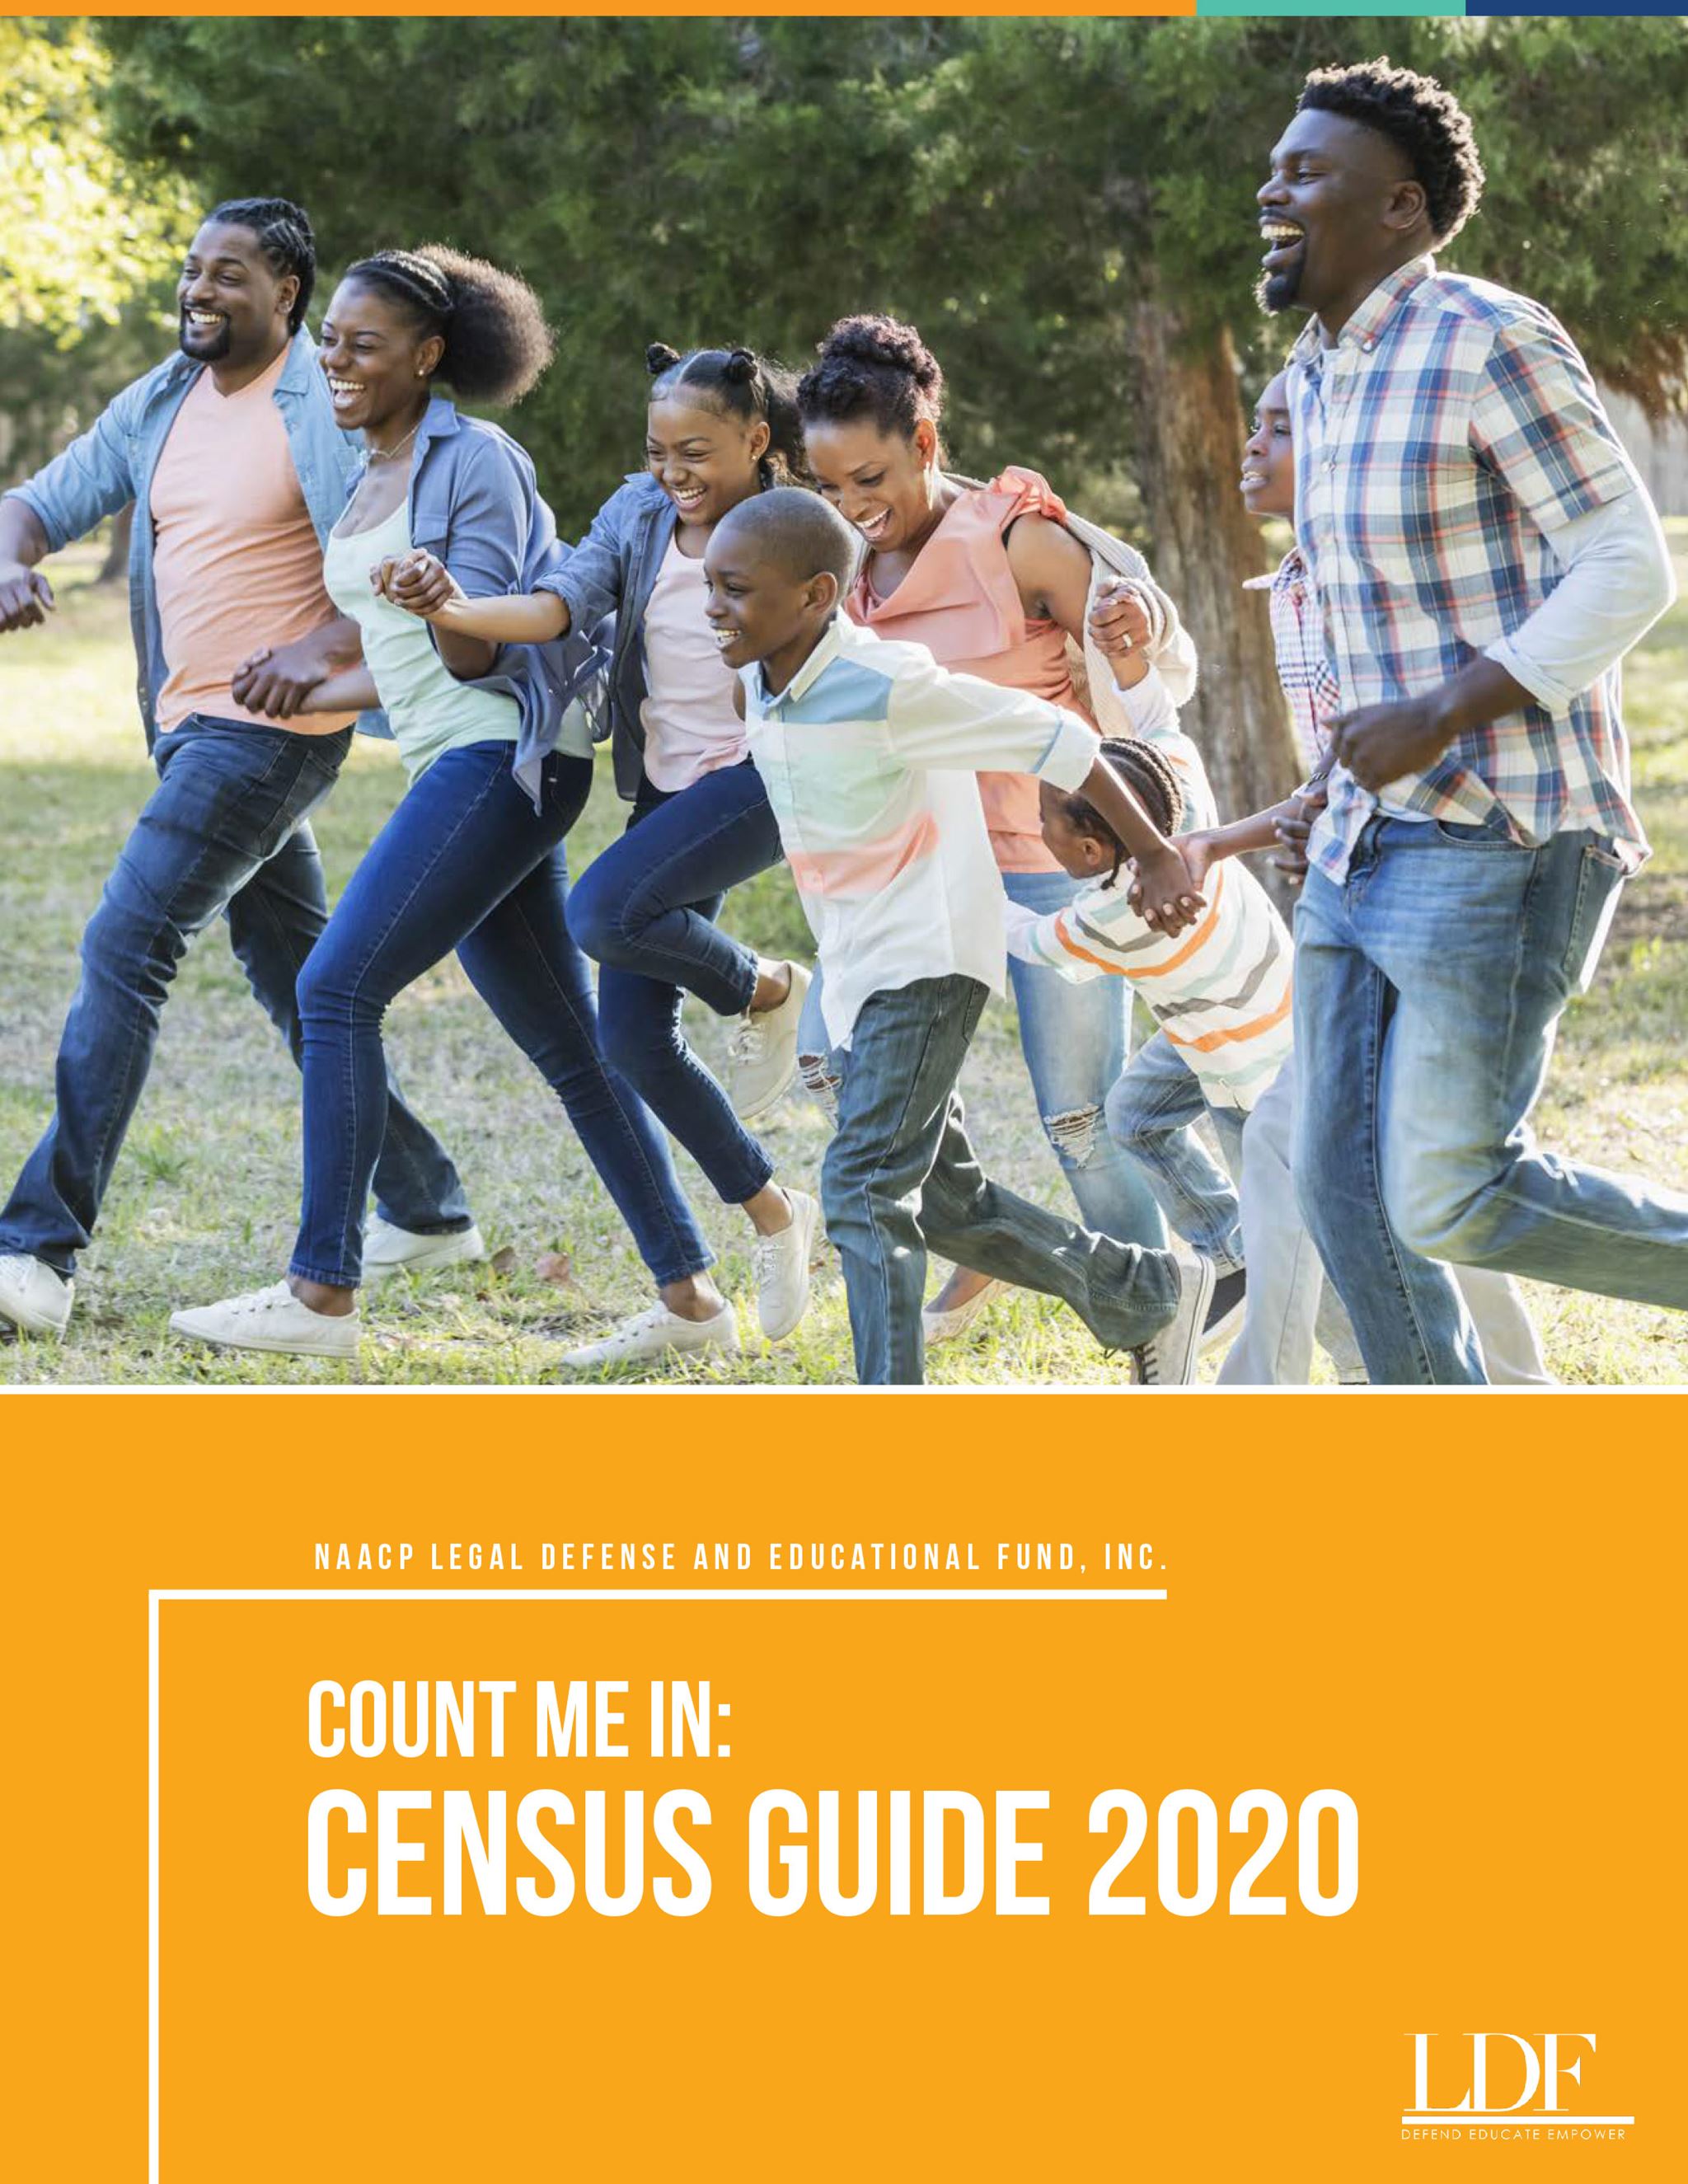 Cover of "Count Me In: Census Guide 2020" brochure depicting a family with kids playing in a park